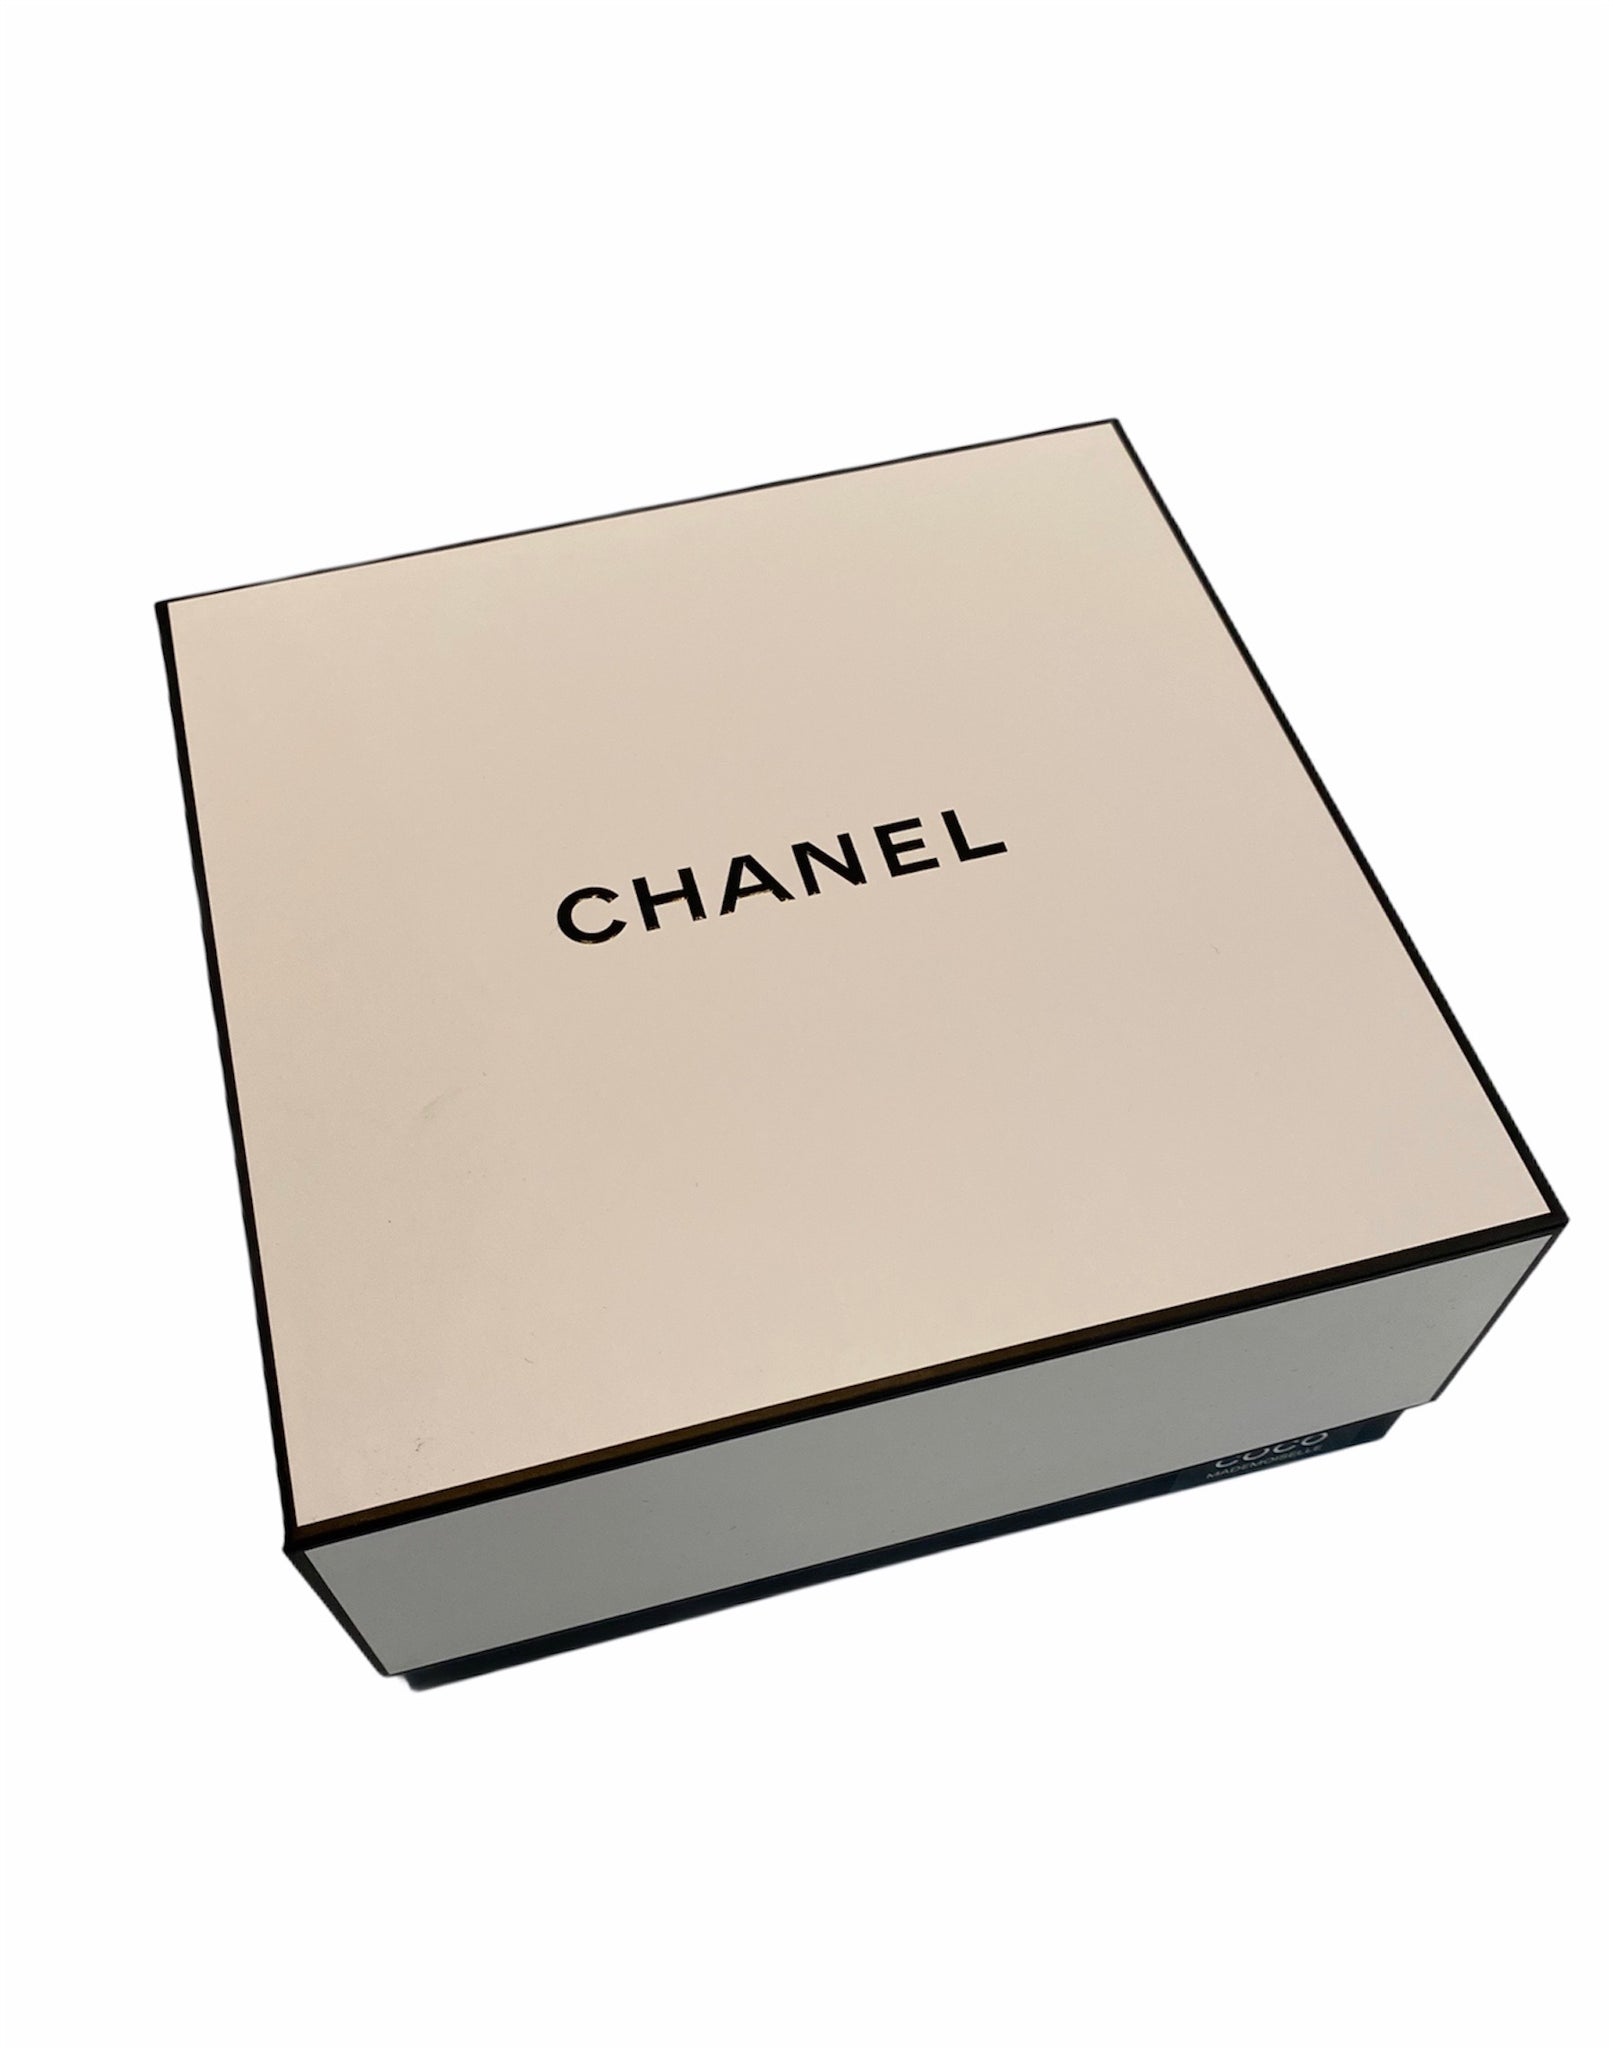 coco chanel gift sets for women